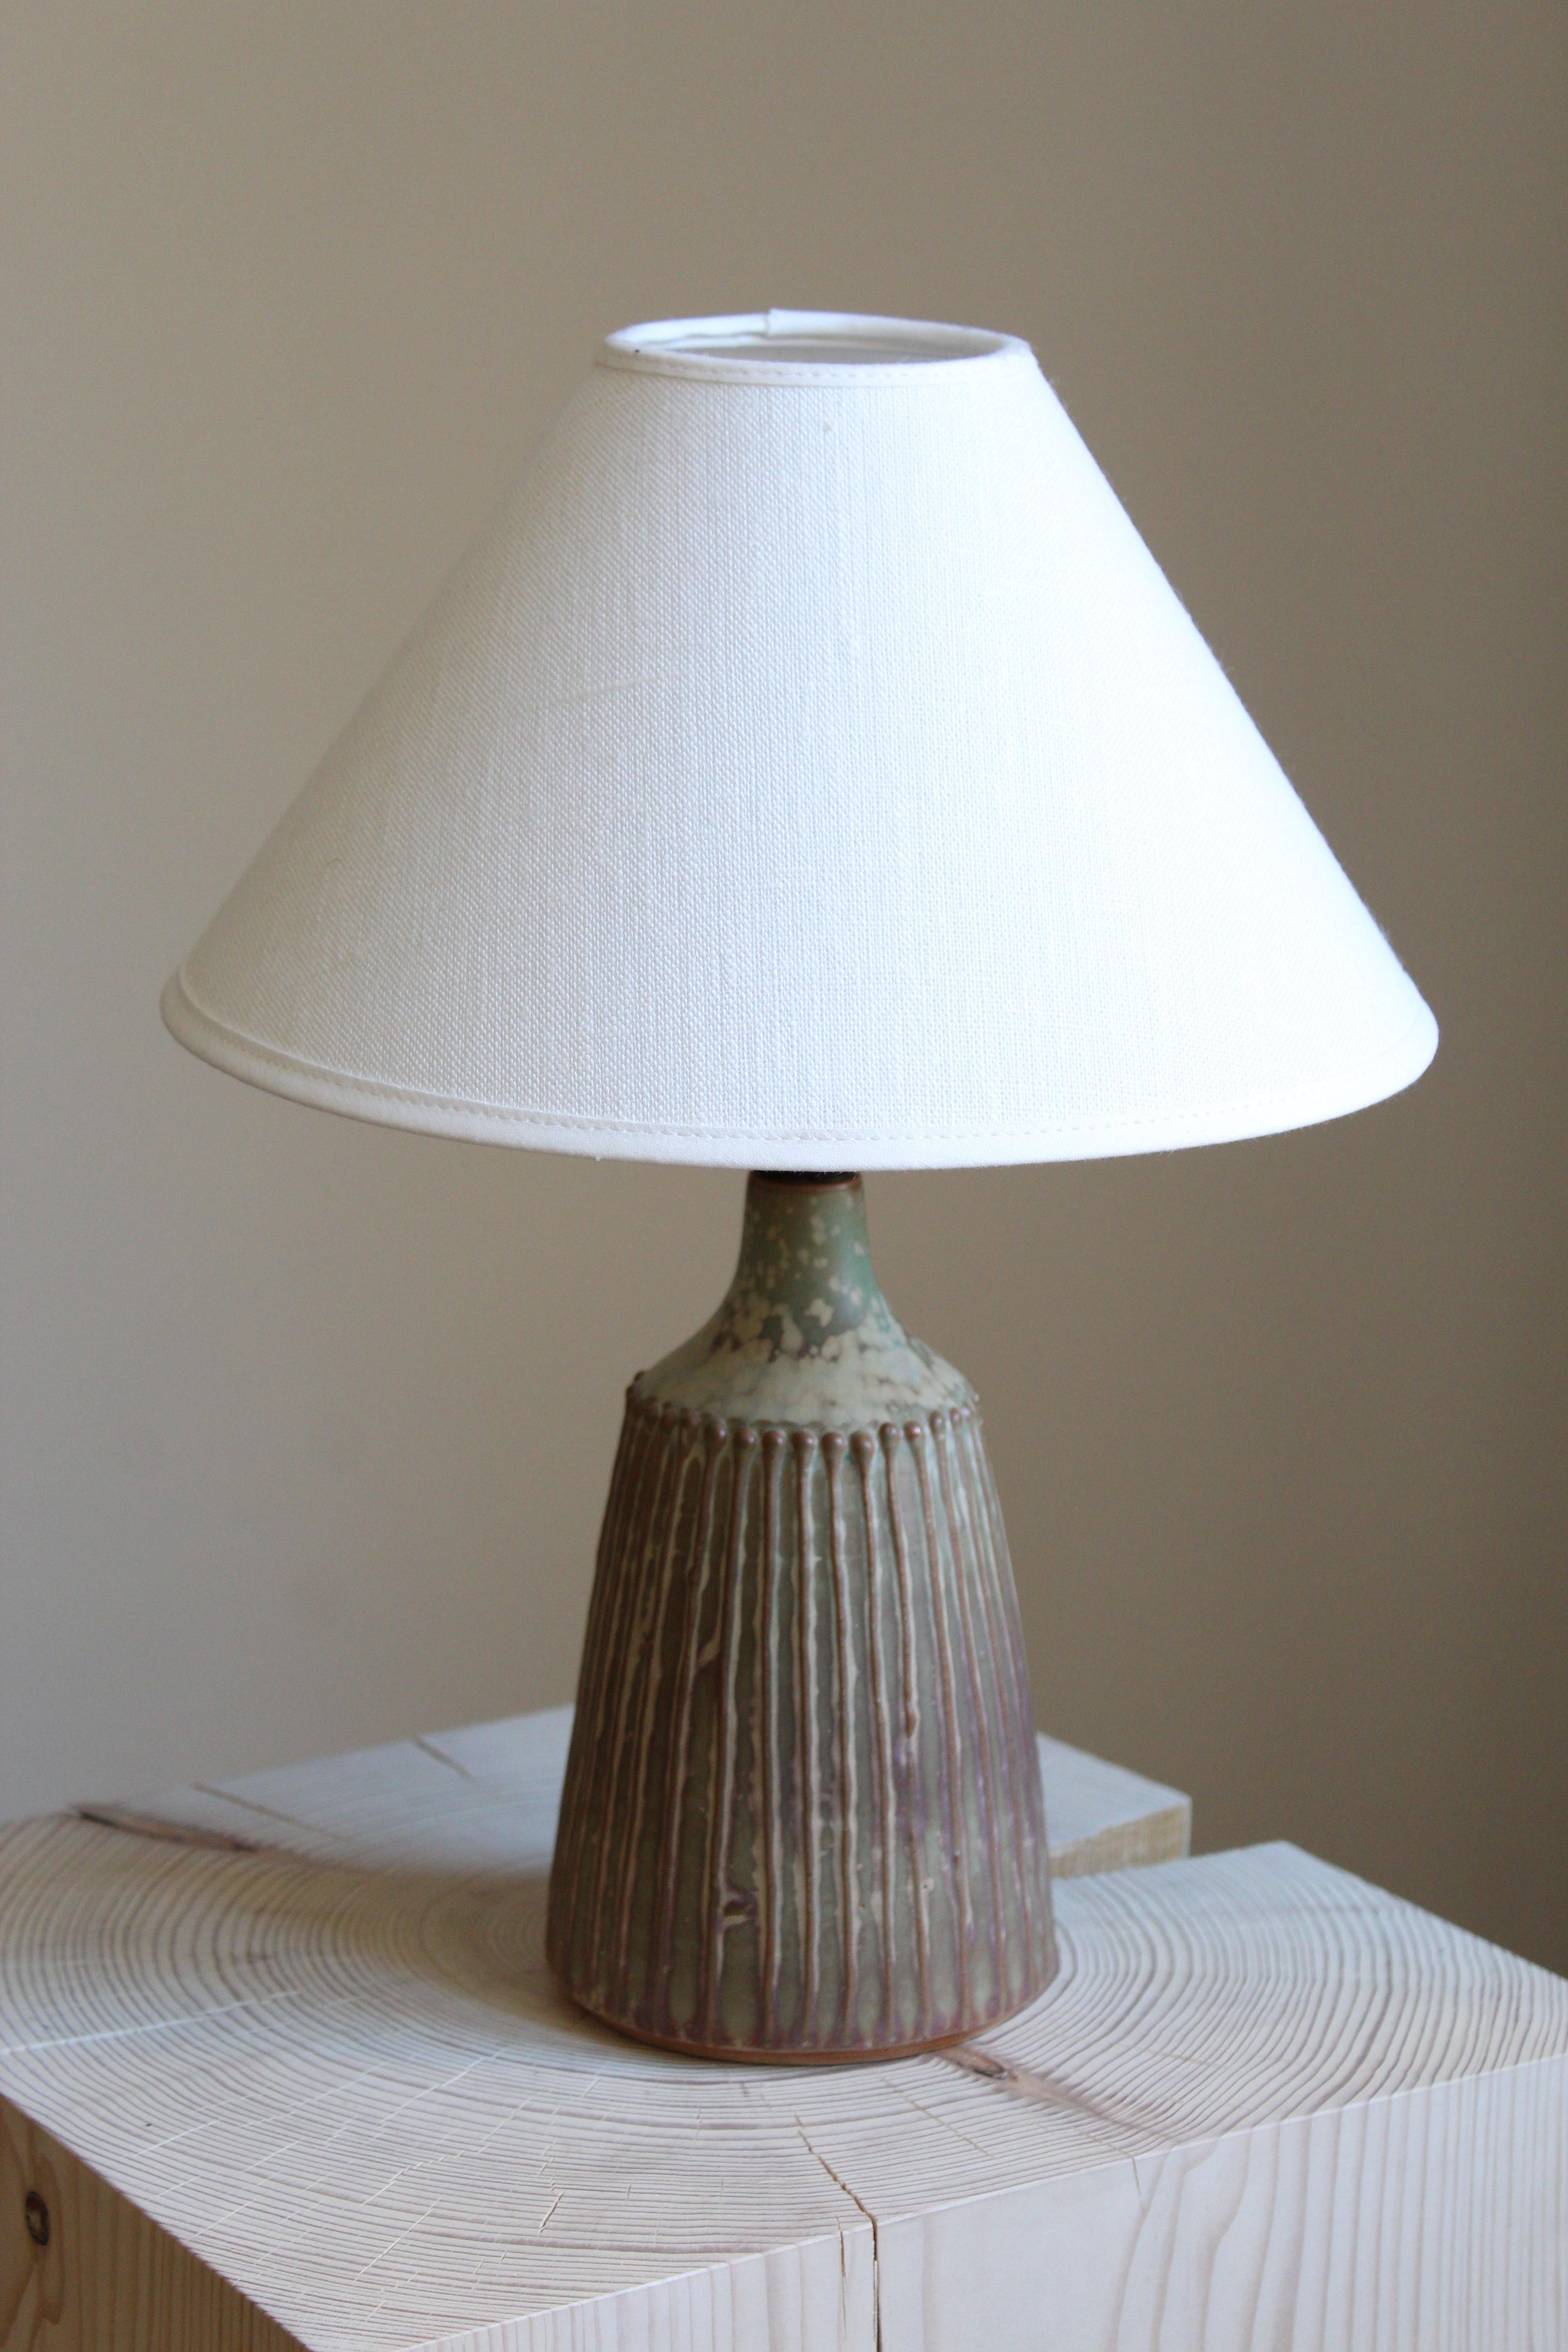 A table lamp. Produced and designed by Rolf Palm, Sweden.

In glazed stoneware. Sold without lampshade. Stated dimensions exclude lampshade.